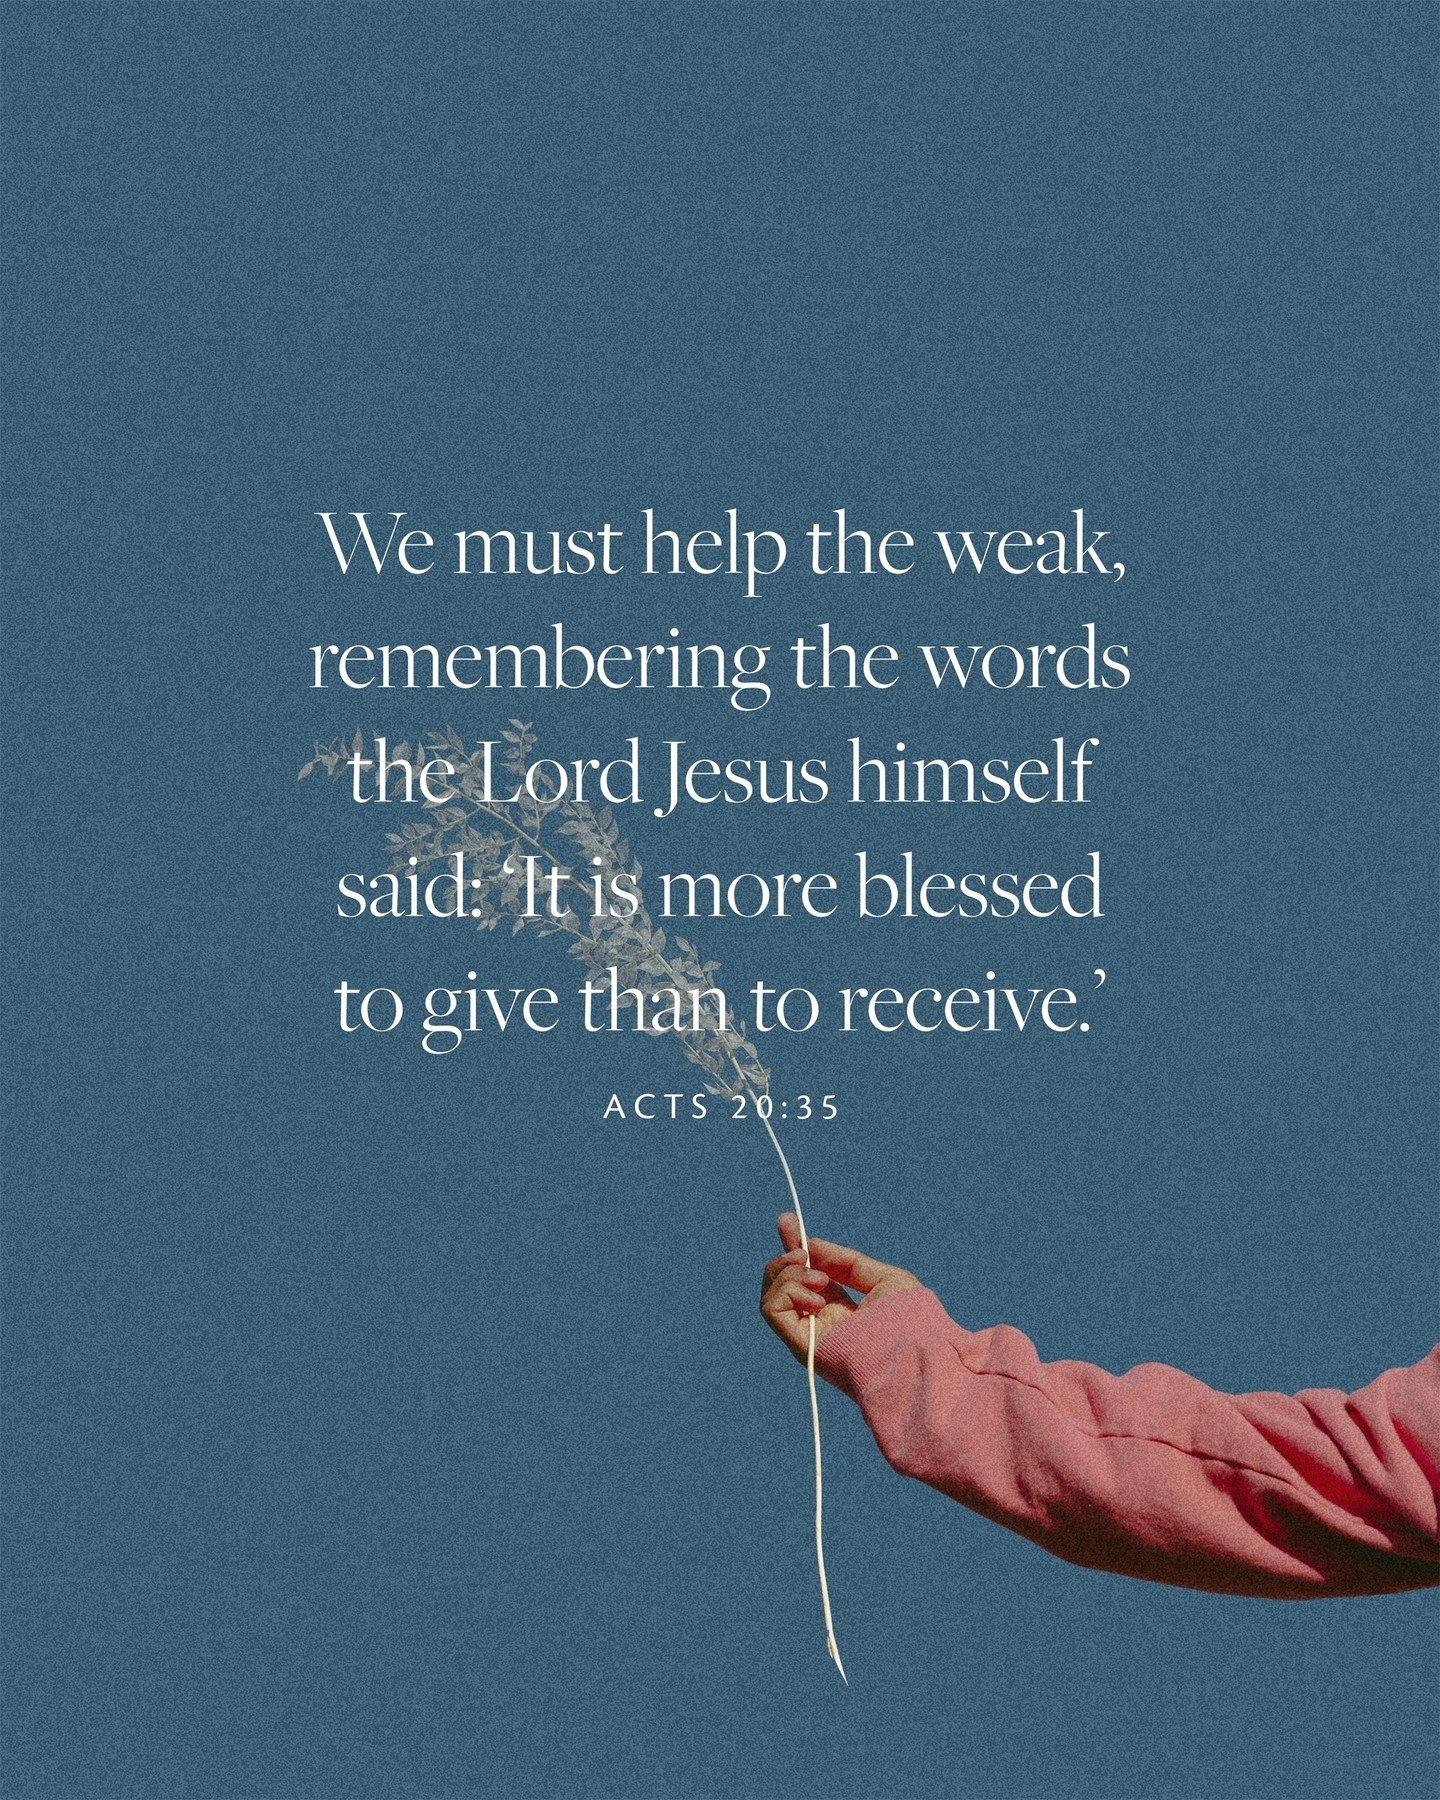 &quot;We must help the weak, remembering the words the Lord Jesus himself said: 'It is more blessed to give than to receive.'&quot; - Acts 20:35
.
.
.
#church #god #morning #jesus #christ #love #christian #worship #bible #acts